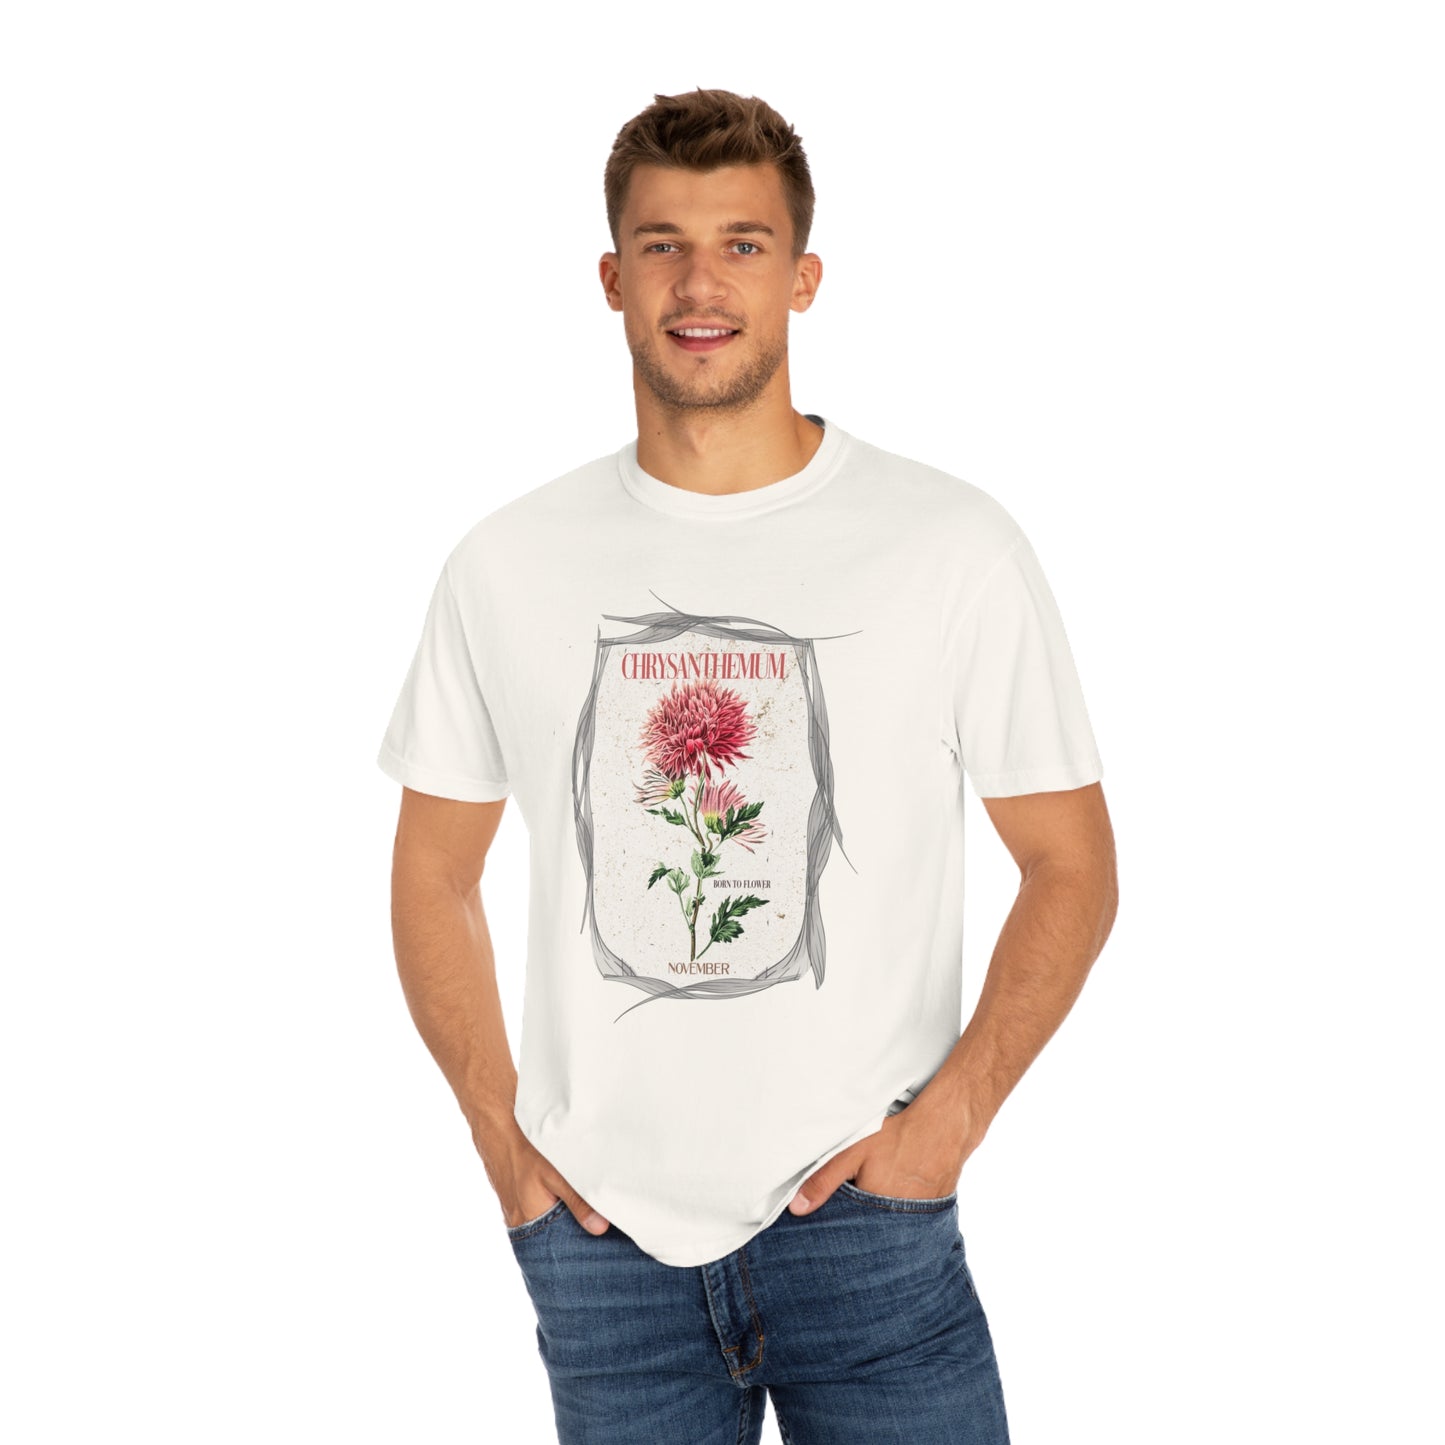 born to flower graphic tee - november